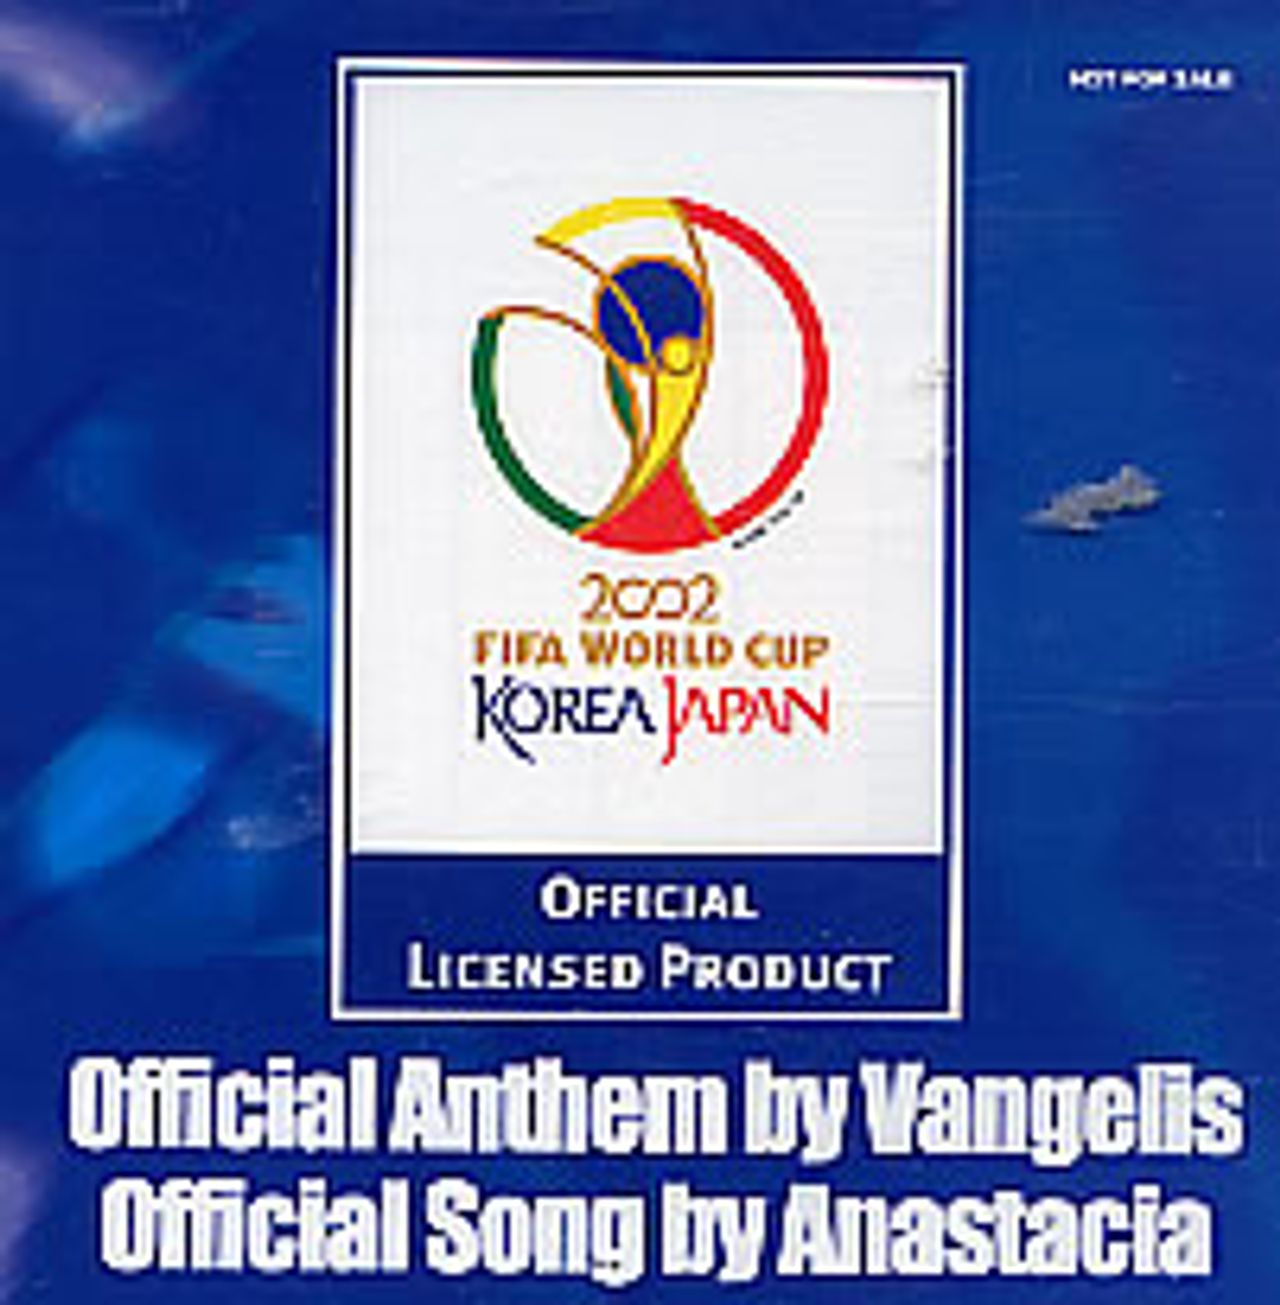 Vangelis 2002 FIFA World Cup Official Anthem Japanese Promo CD